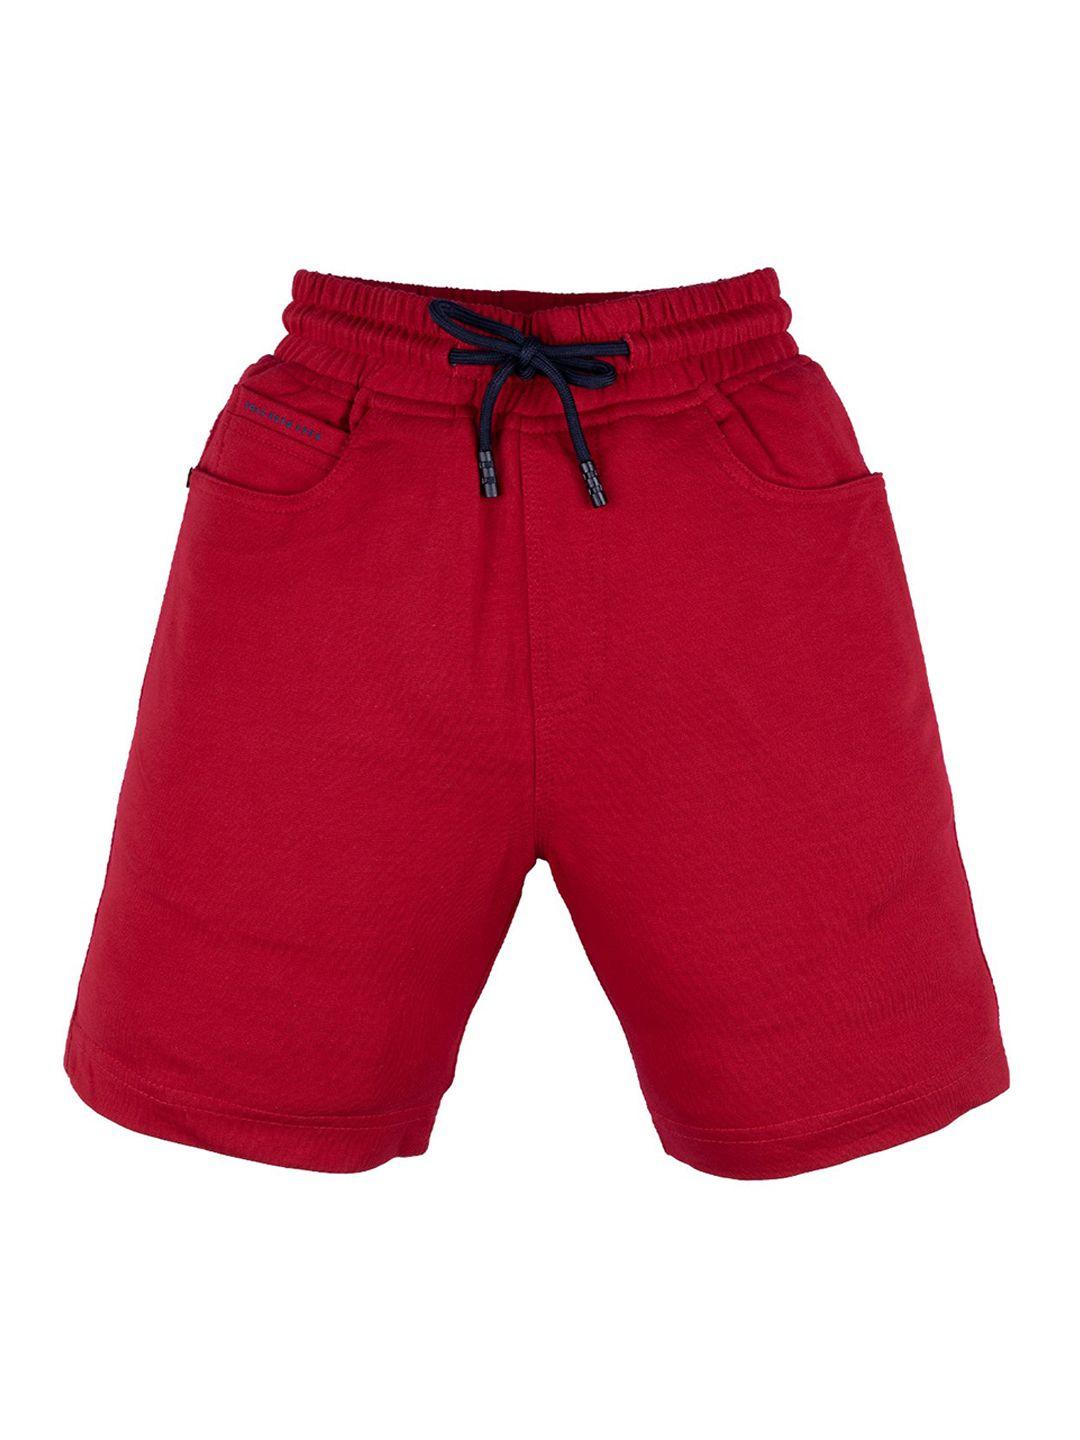 status quo boys red high-rise shorts